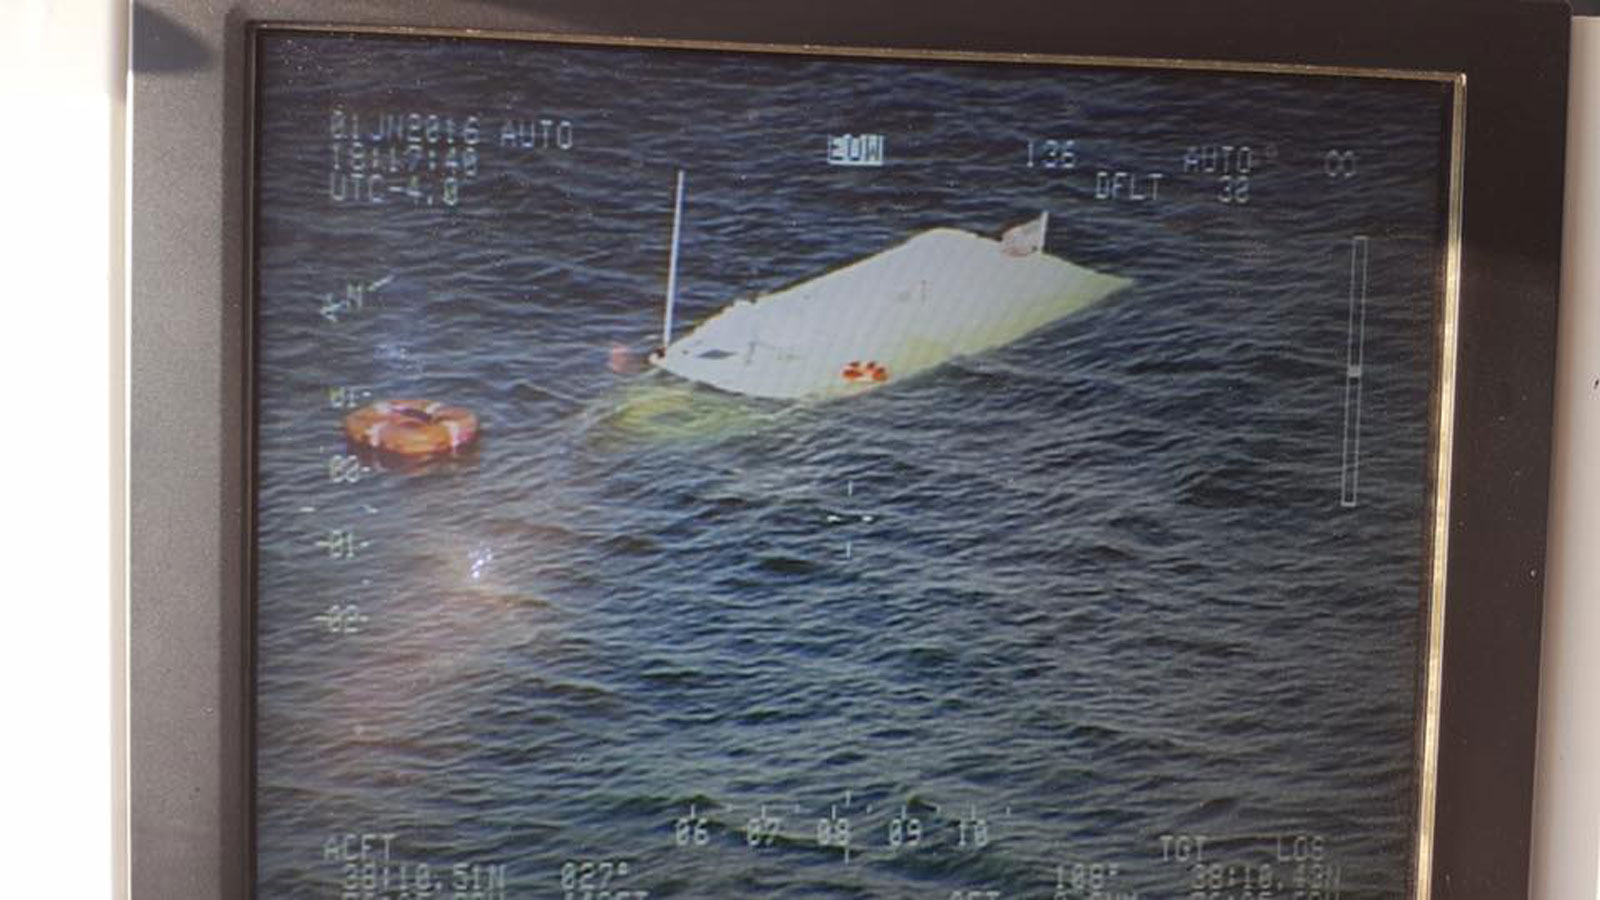 22 people were rescued from a sunken vessel off of Bloodsworth Island in the Chesapeake Bay. (Courtesy Maryland State Police)